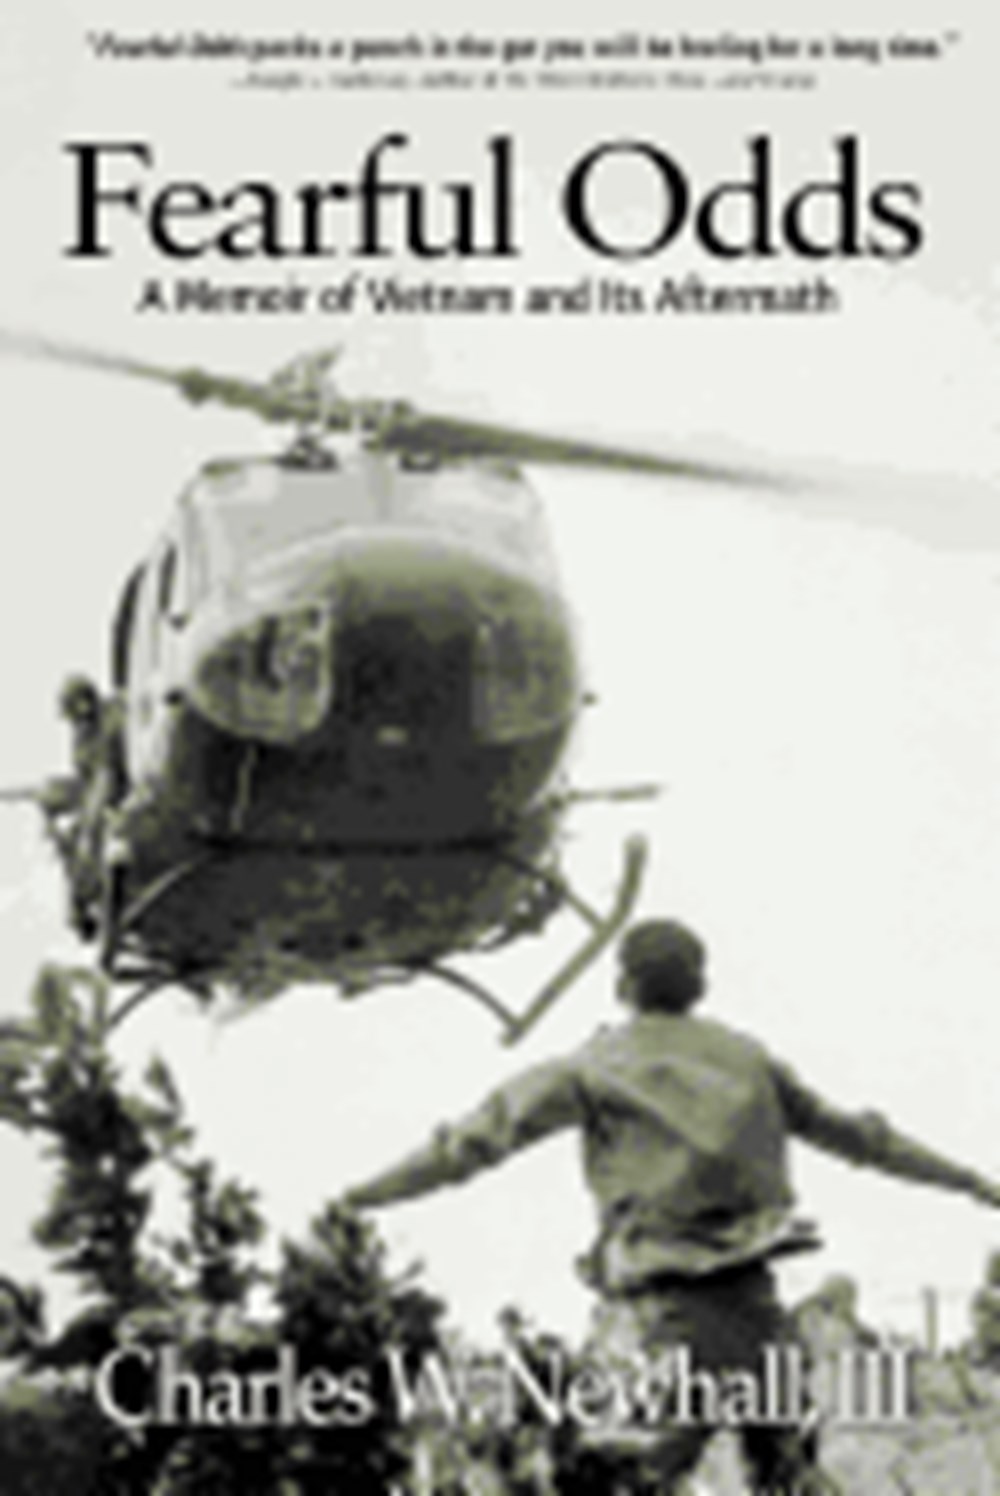 Fearful Odds A Memoir of Vietnam and Its Aftermath